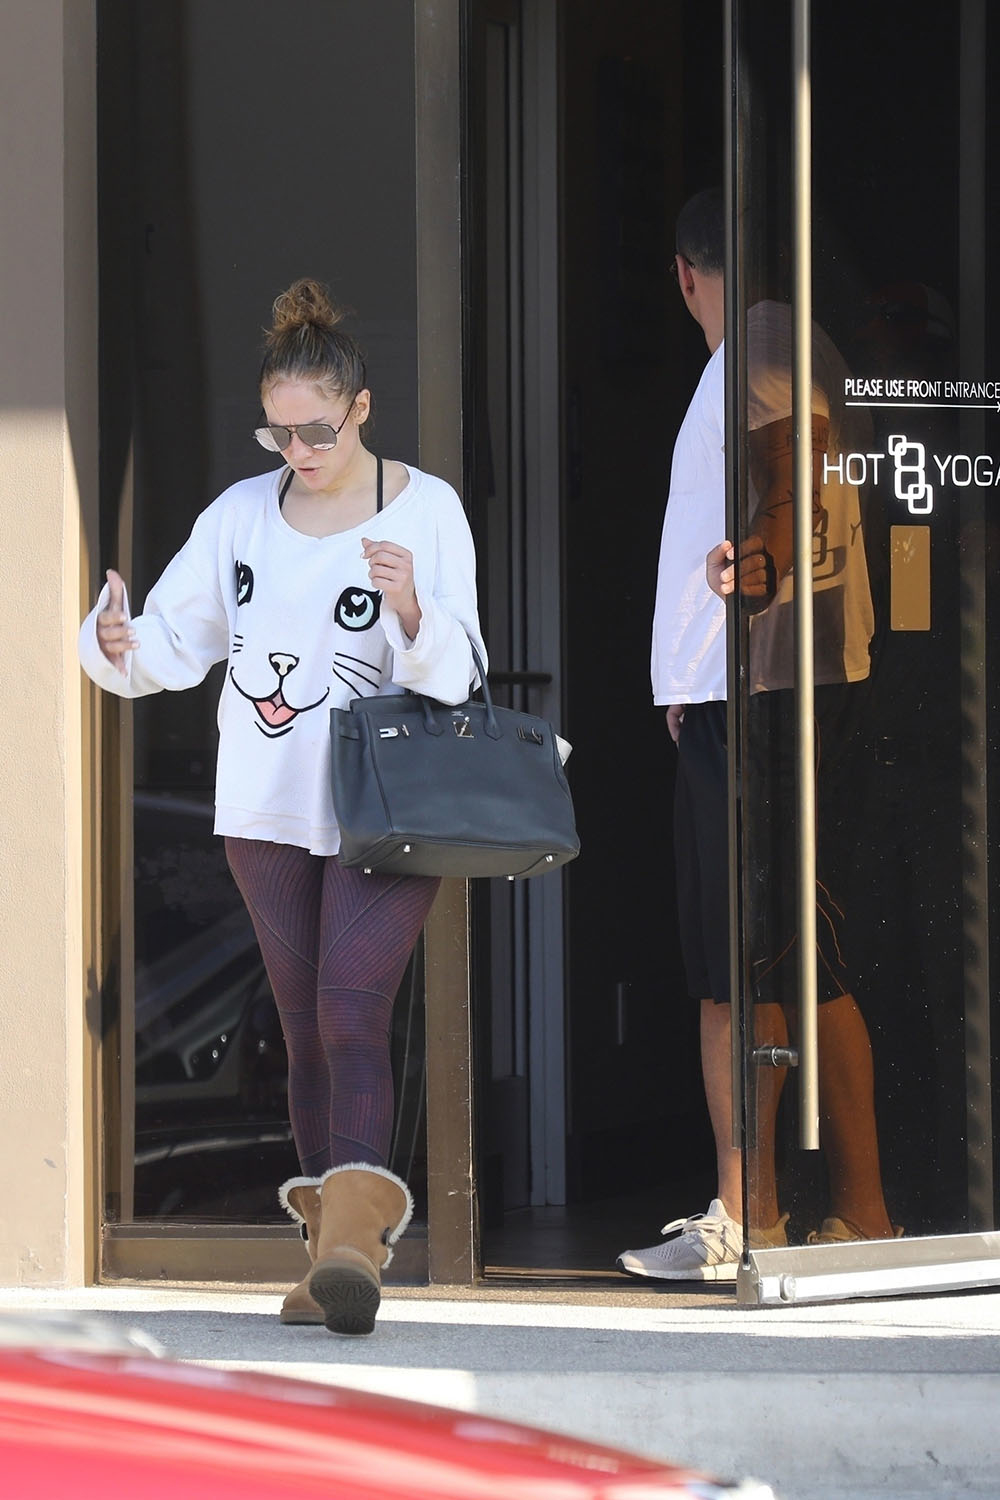 Jennifer Lopez and her boyfriend, A Rod, are spotted leaving the gym after a workout on Sunday.